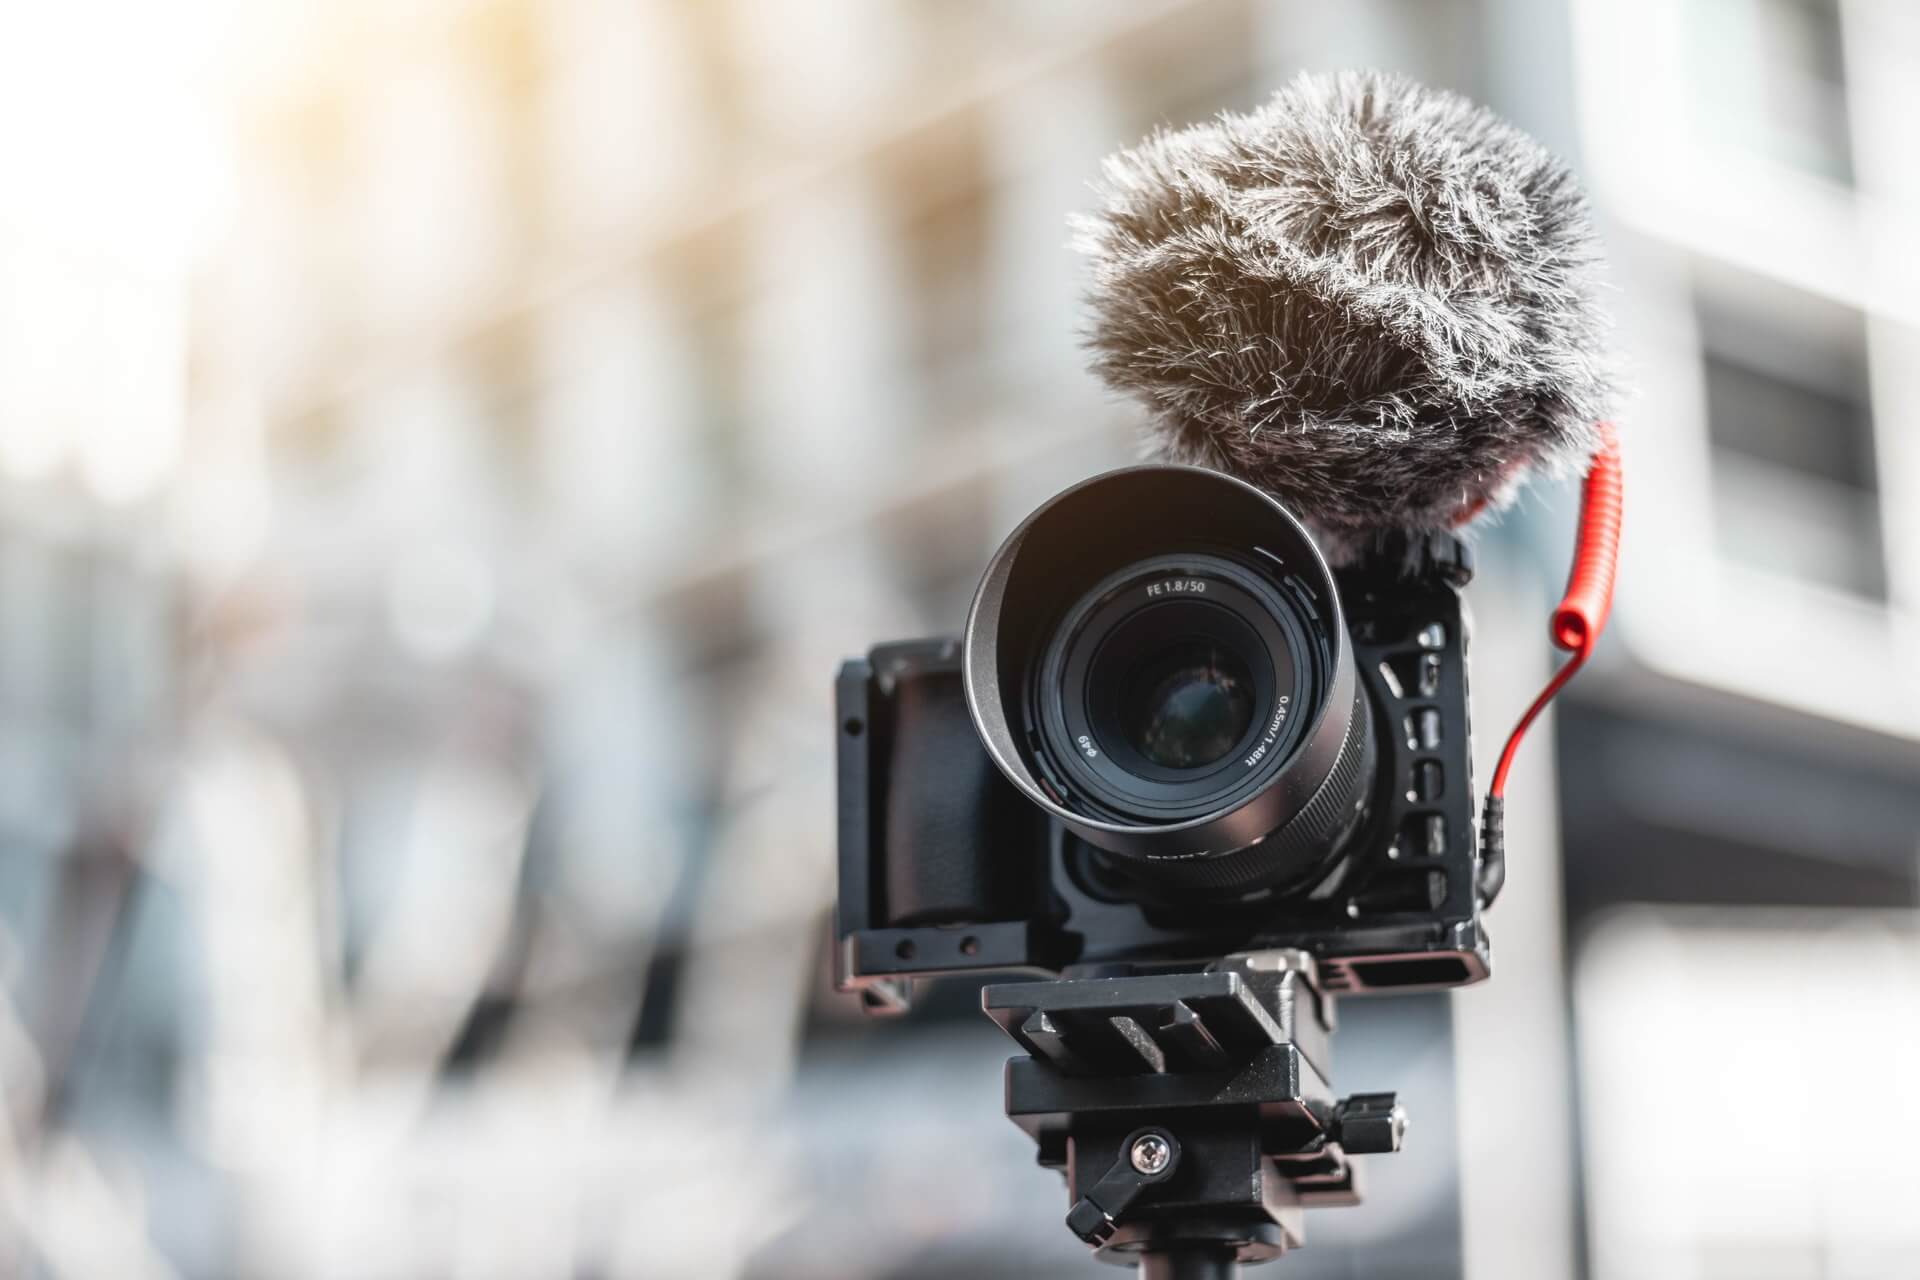 How to start vlogging in 2022: The ultimate step-by-step guide